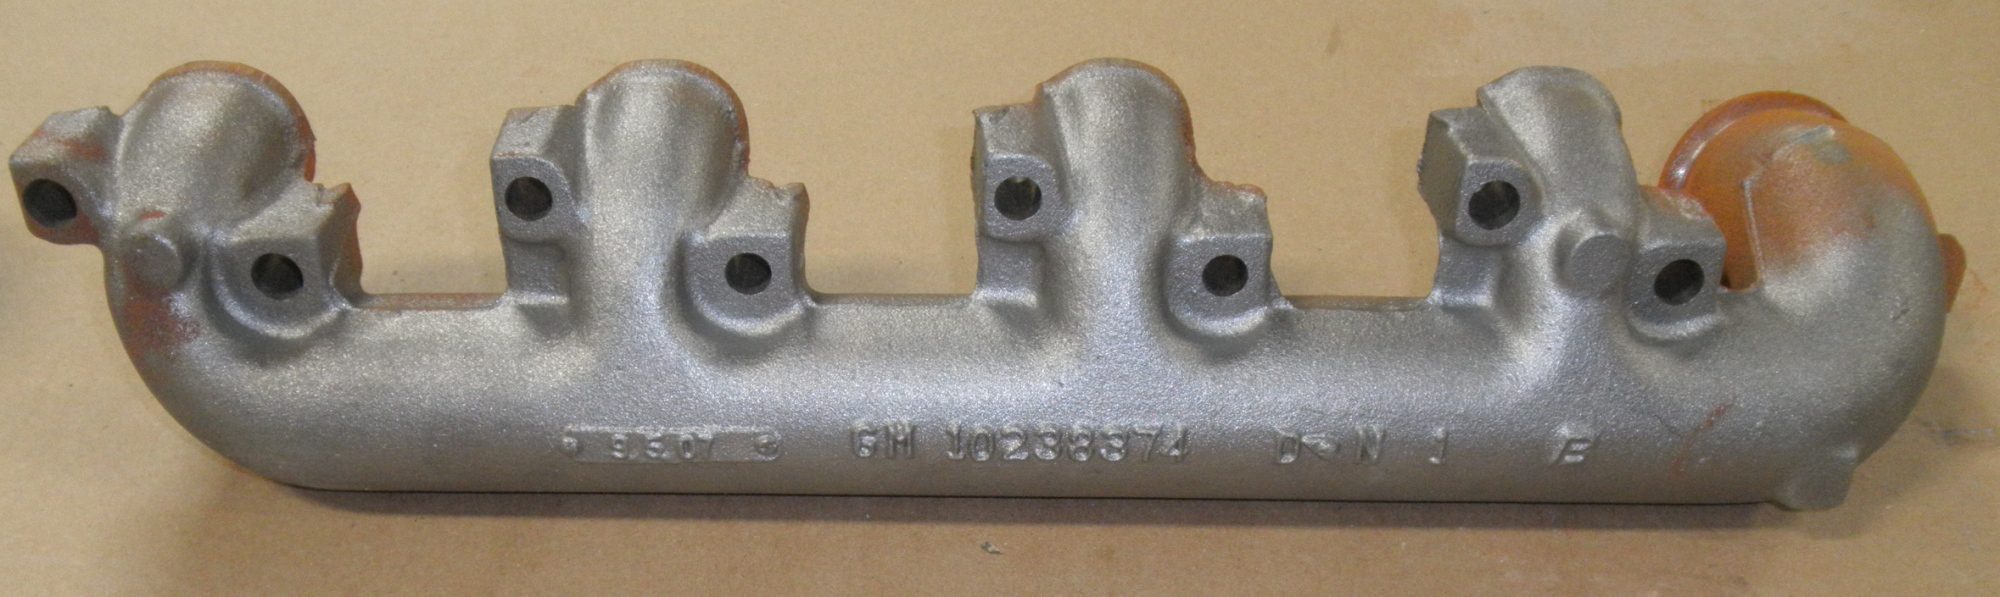 2815-01-437-1021 AM General Exhaust Manifold 5744445 Fits GM 6.5